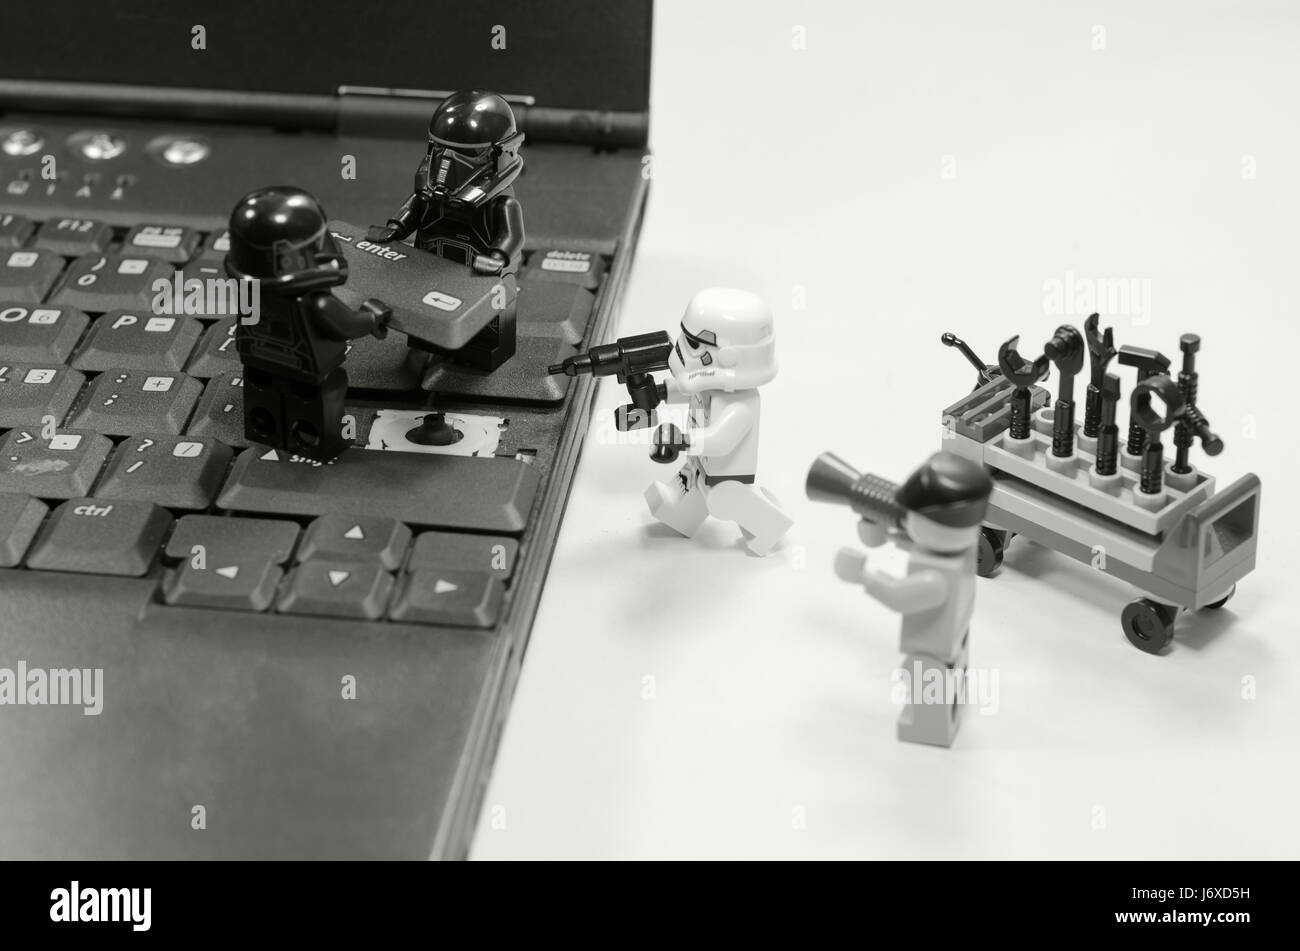 lego star wars minifigures repair button enter on laptop keyboard.black and white image. Stock Photo